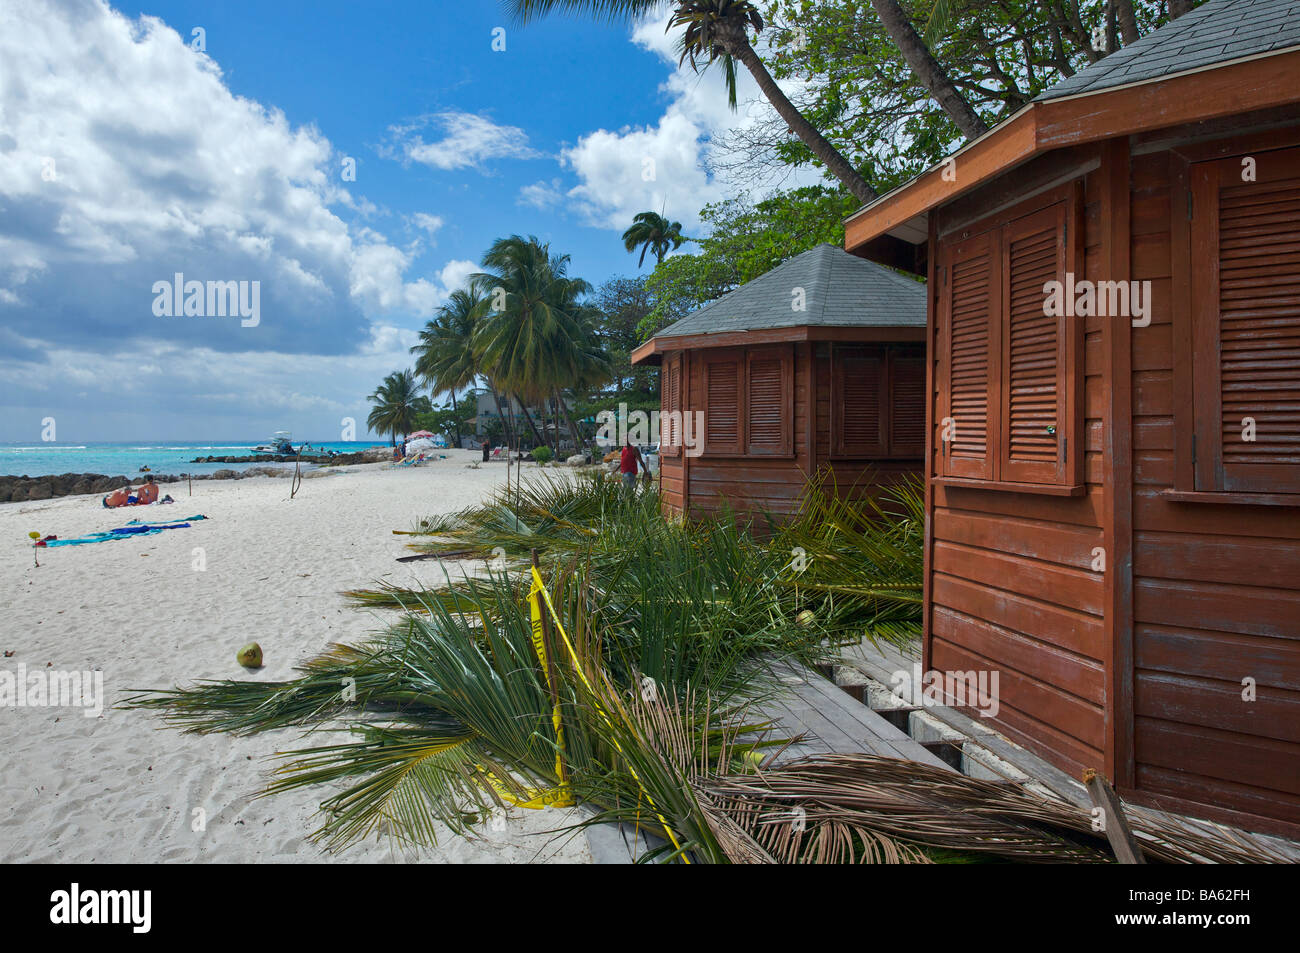 Beach huts under development, covered with coconut leaves in Worthing beach, Barbados, 'West Indies' Stock Photo